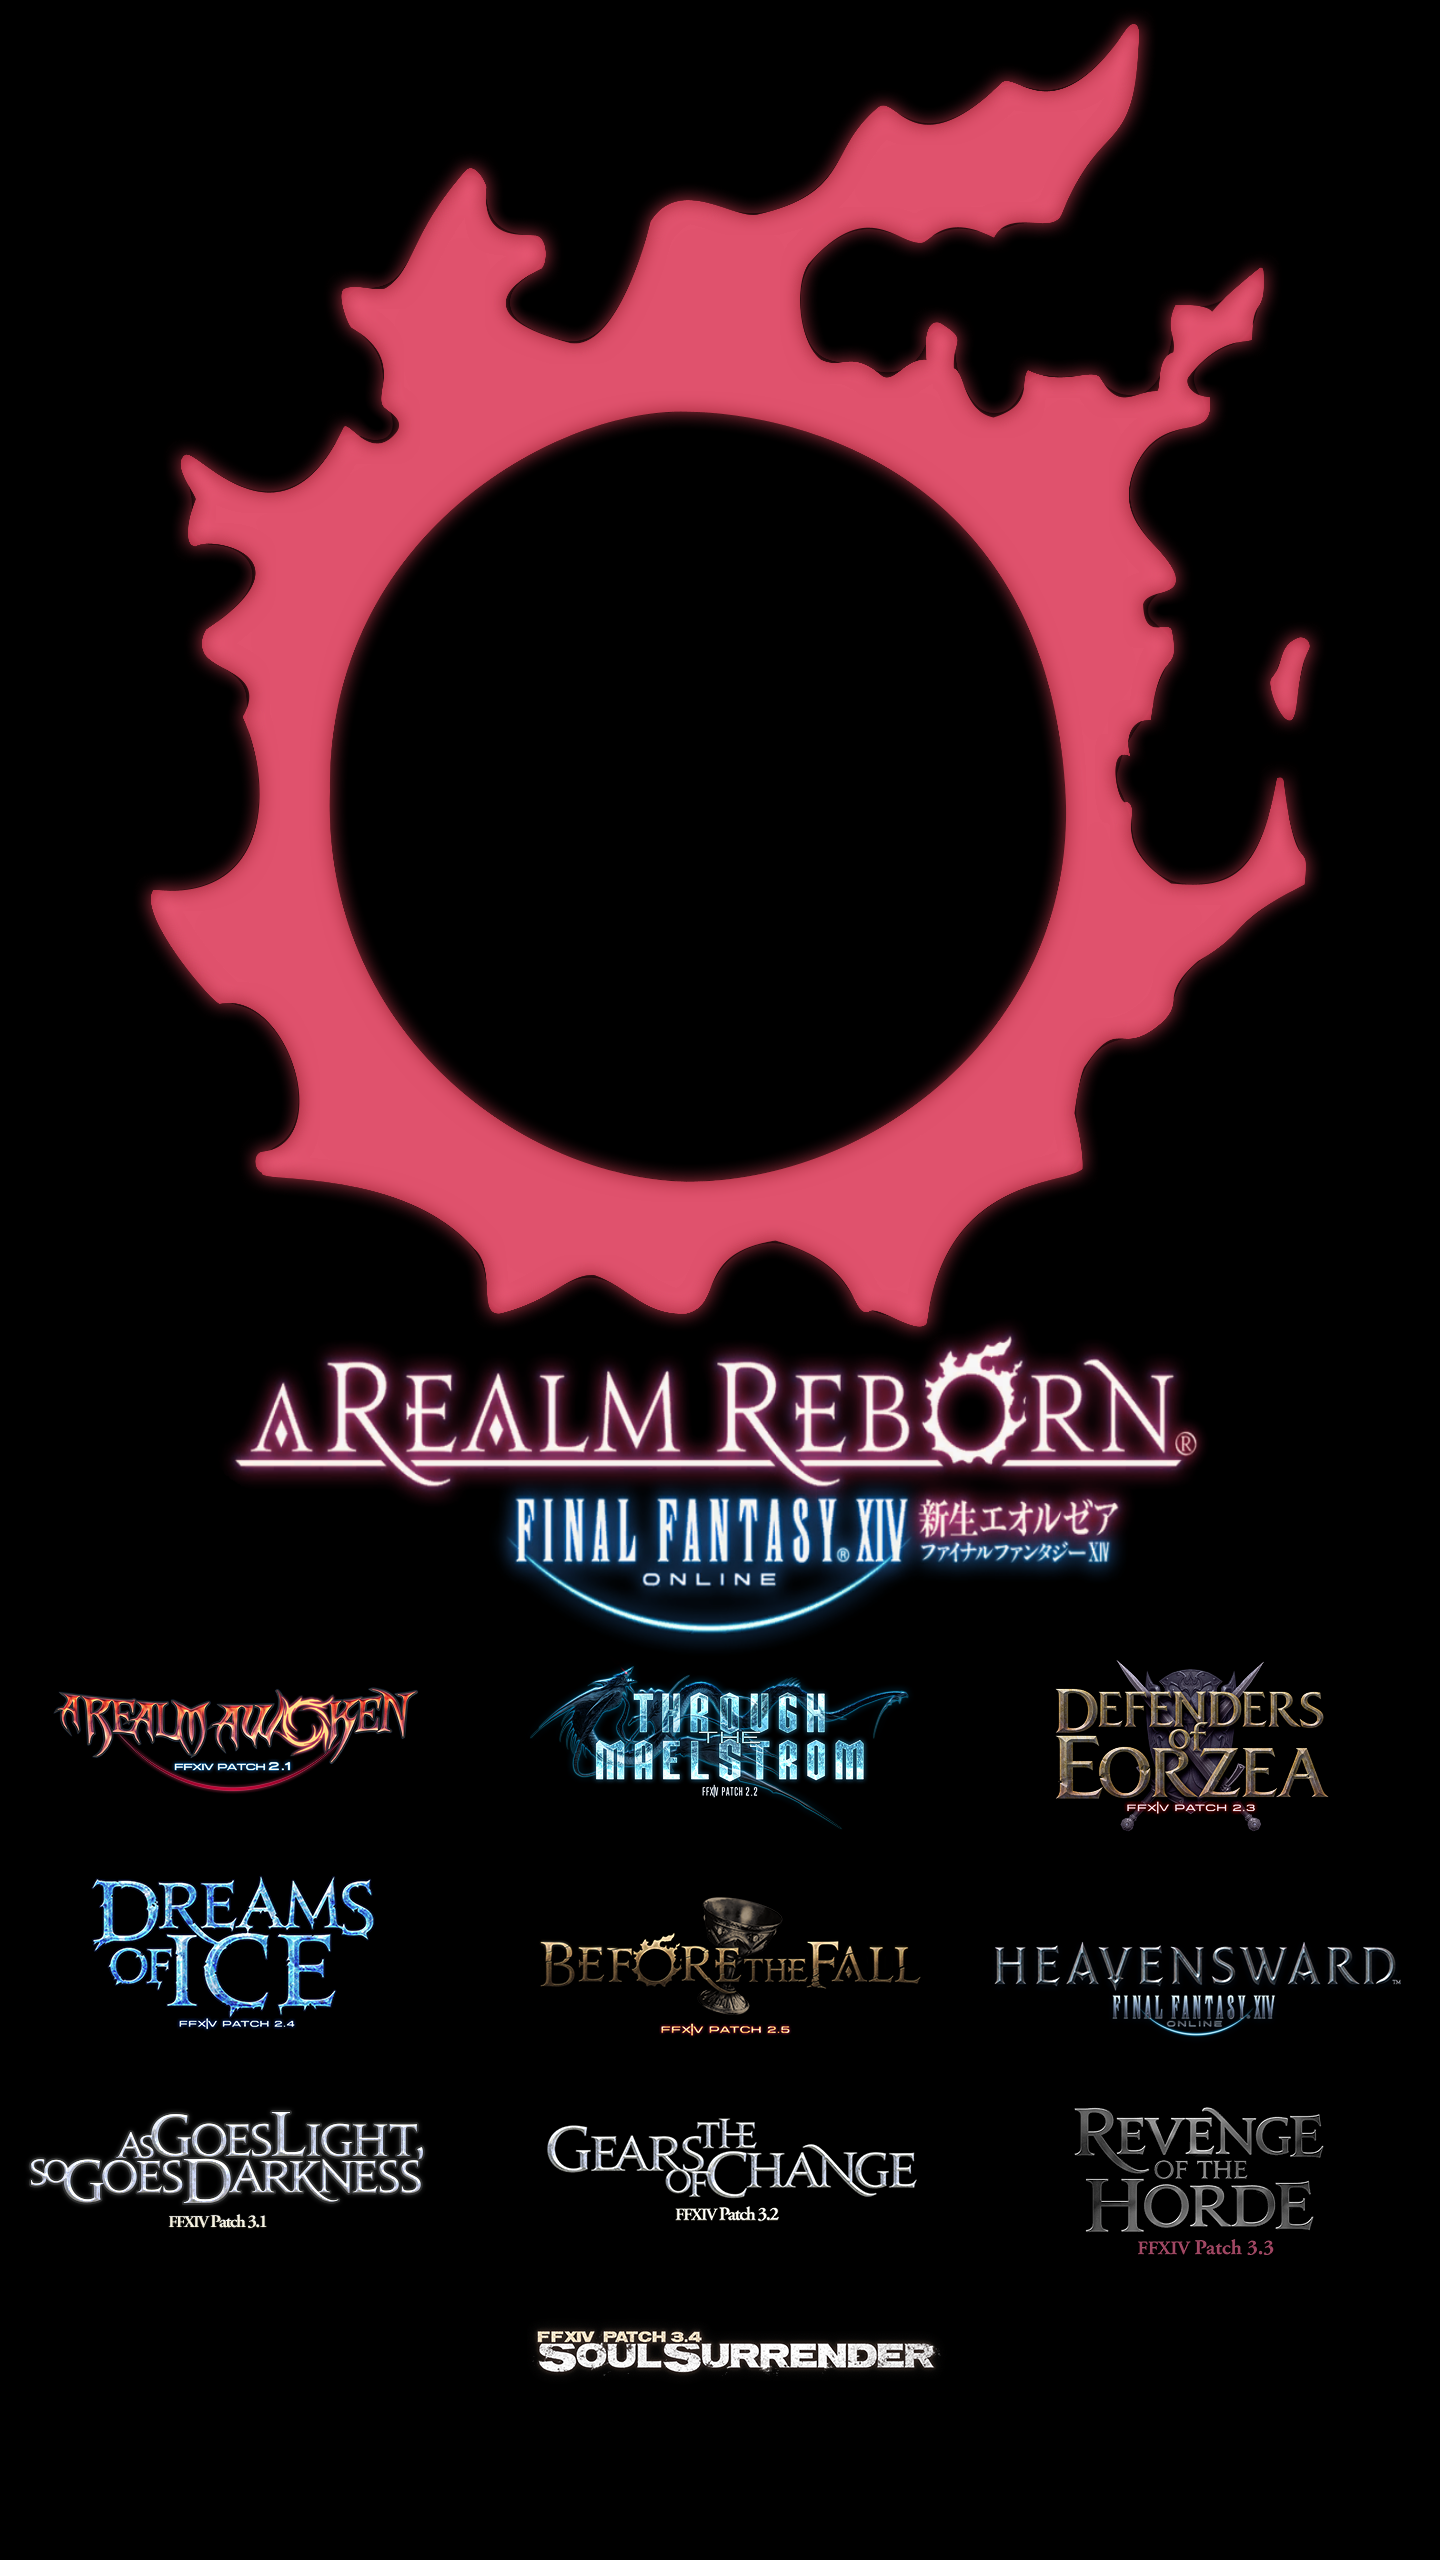 Made an FFXIV mobile phone wallpaper for myself. Figured maybe